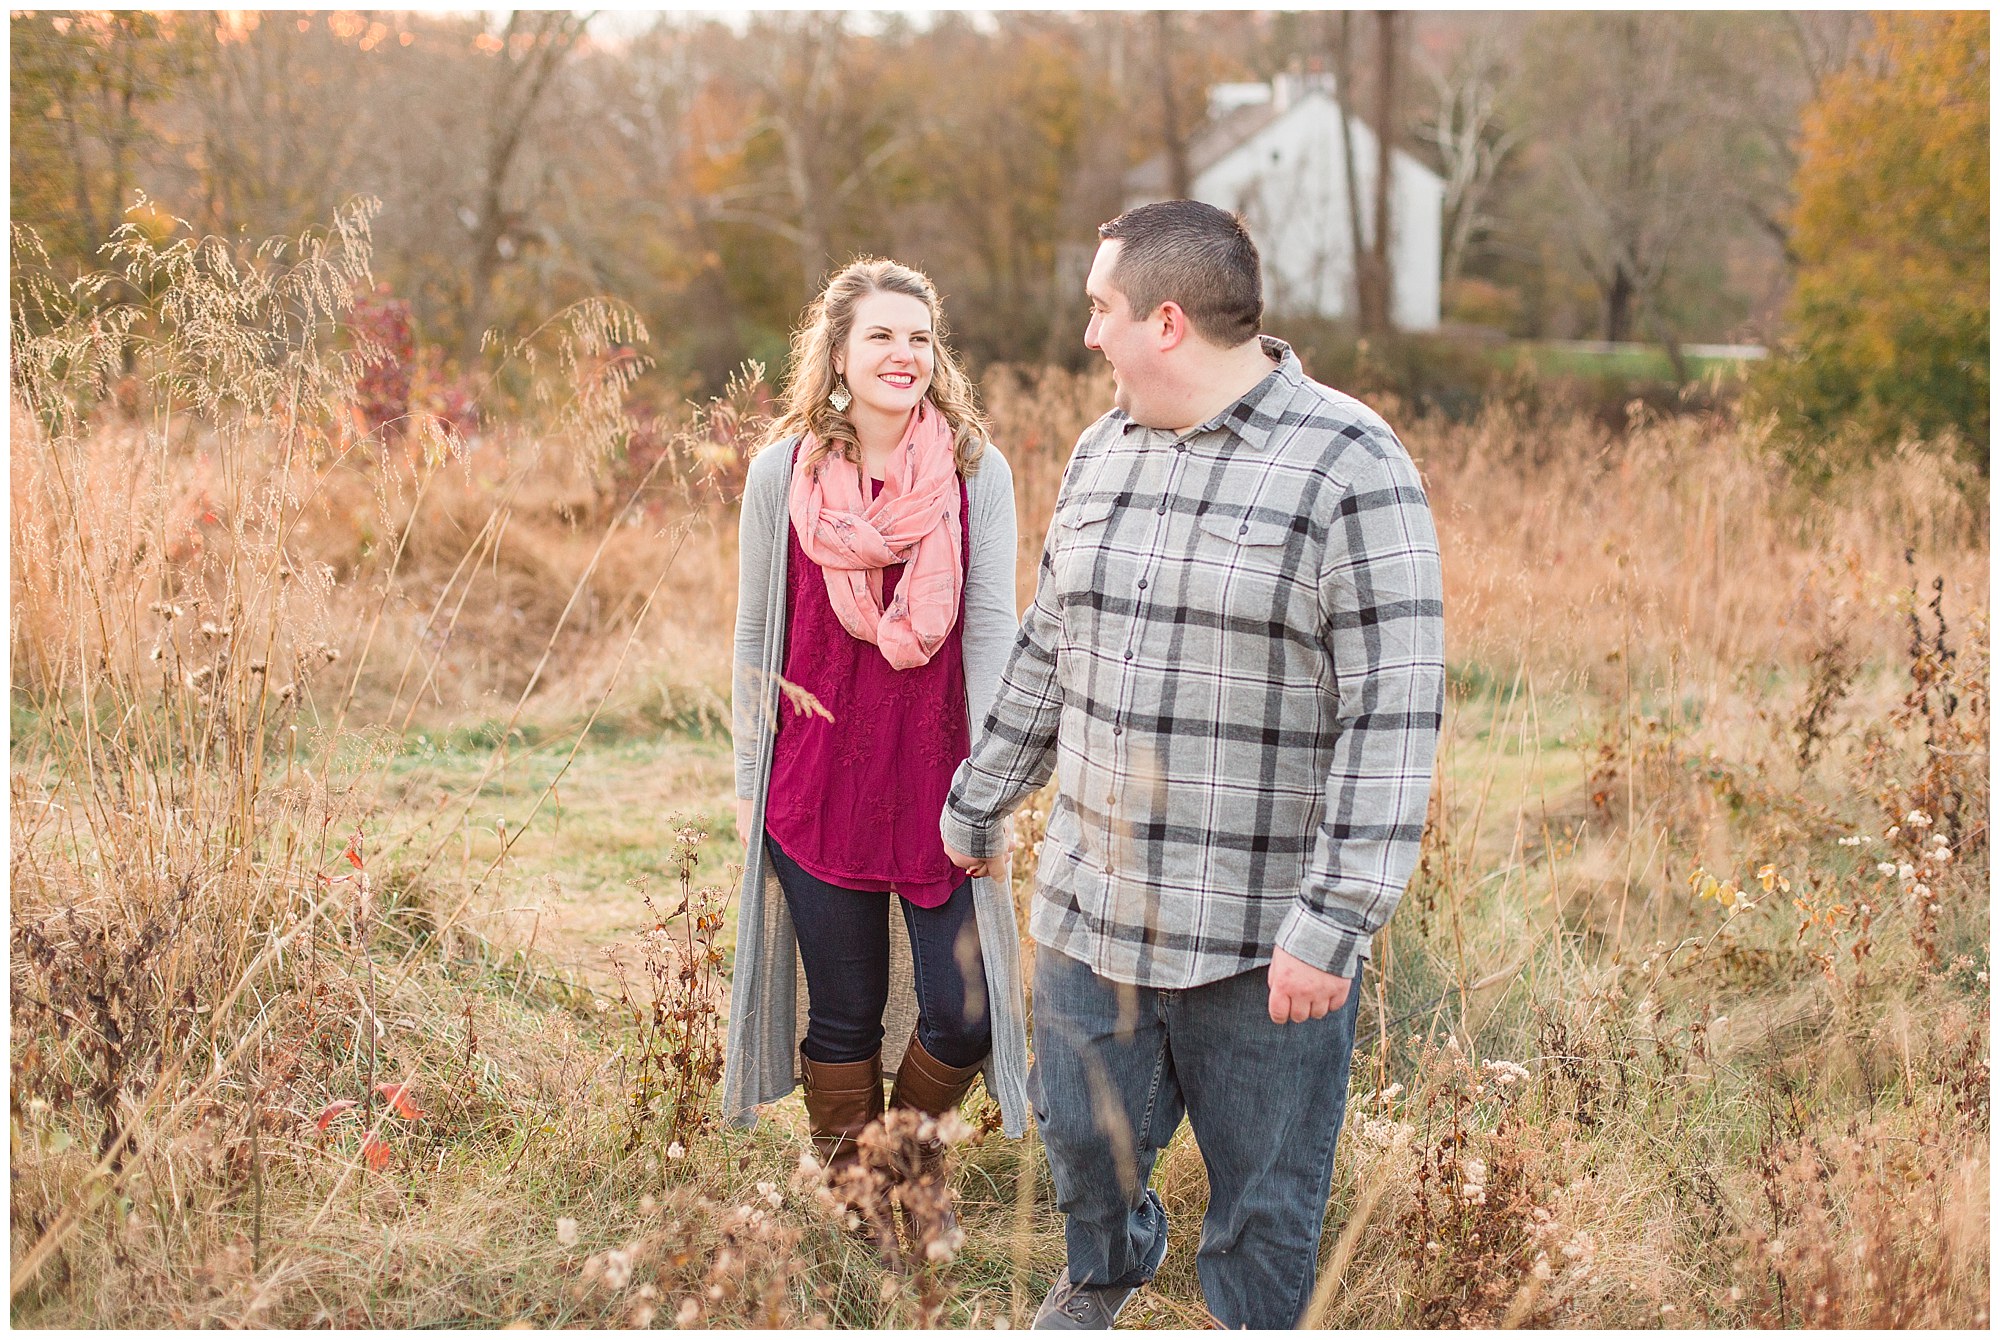 Rob & Kendra's November Engagement at Philander Chase Knox Estate in Valley Forge Park in Wayne PA Photos